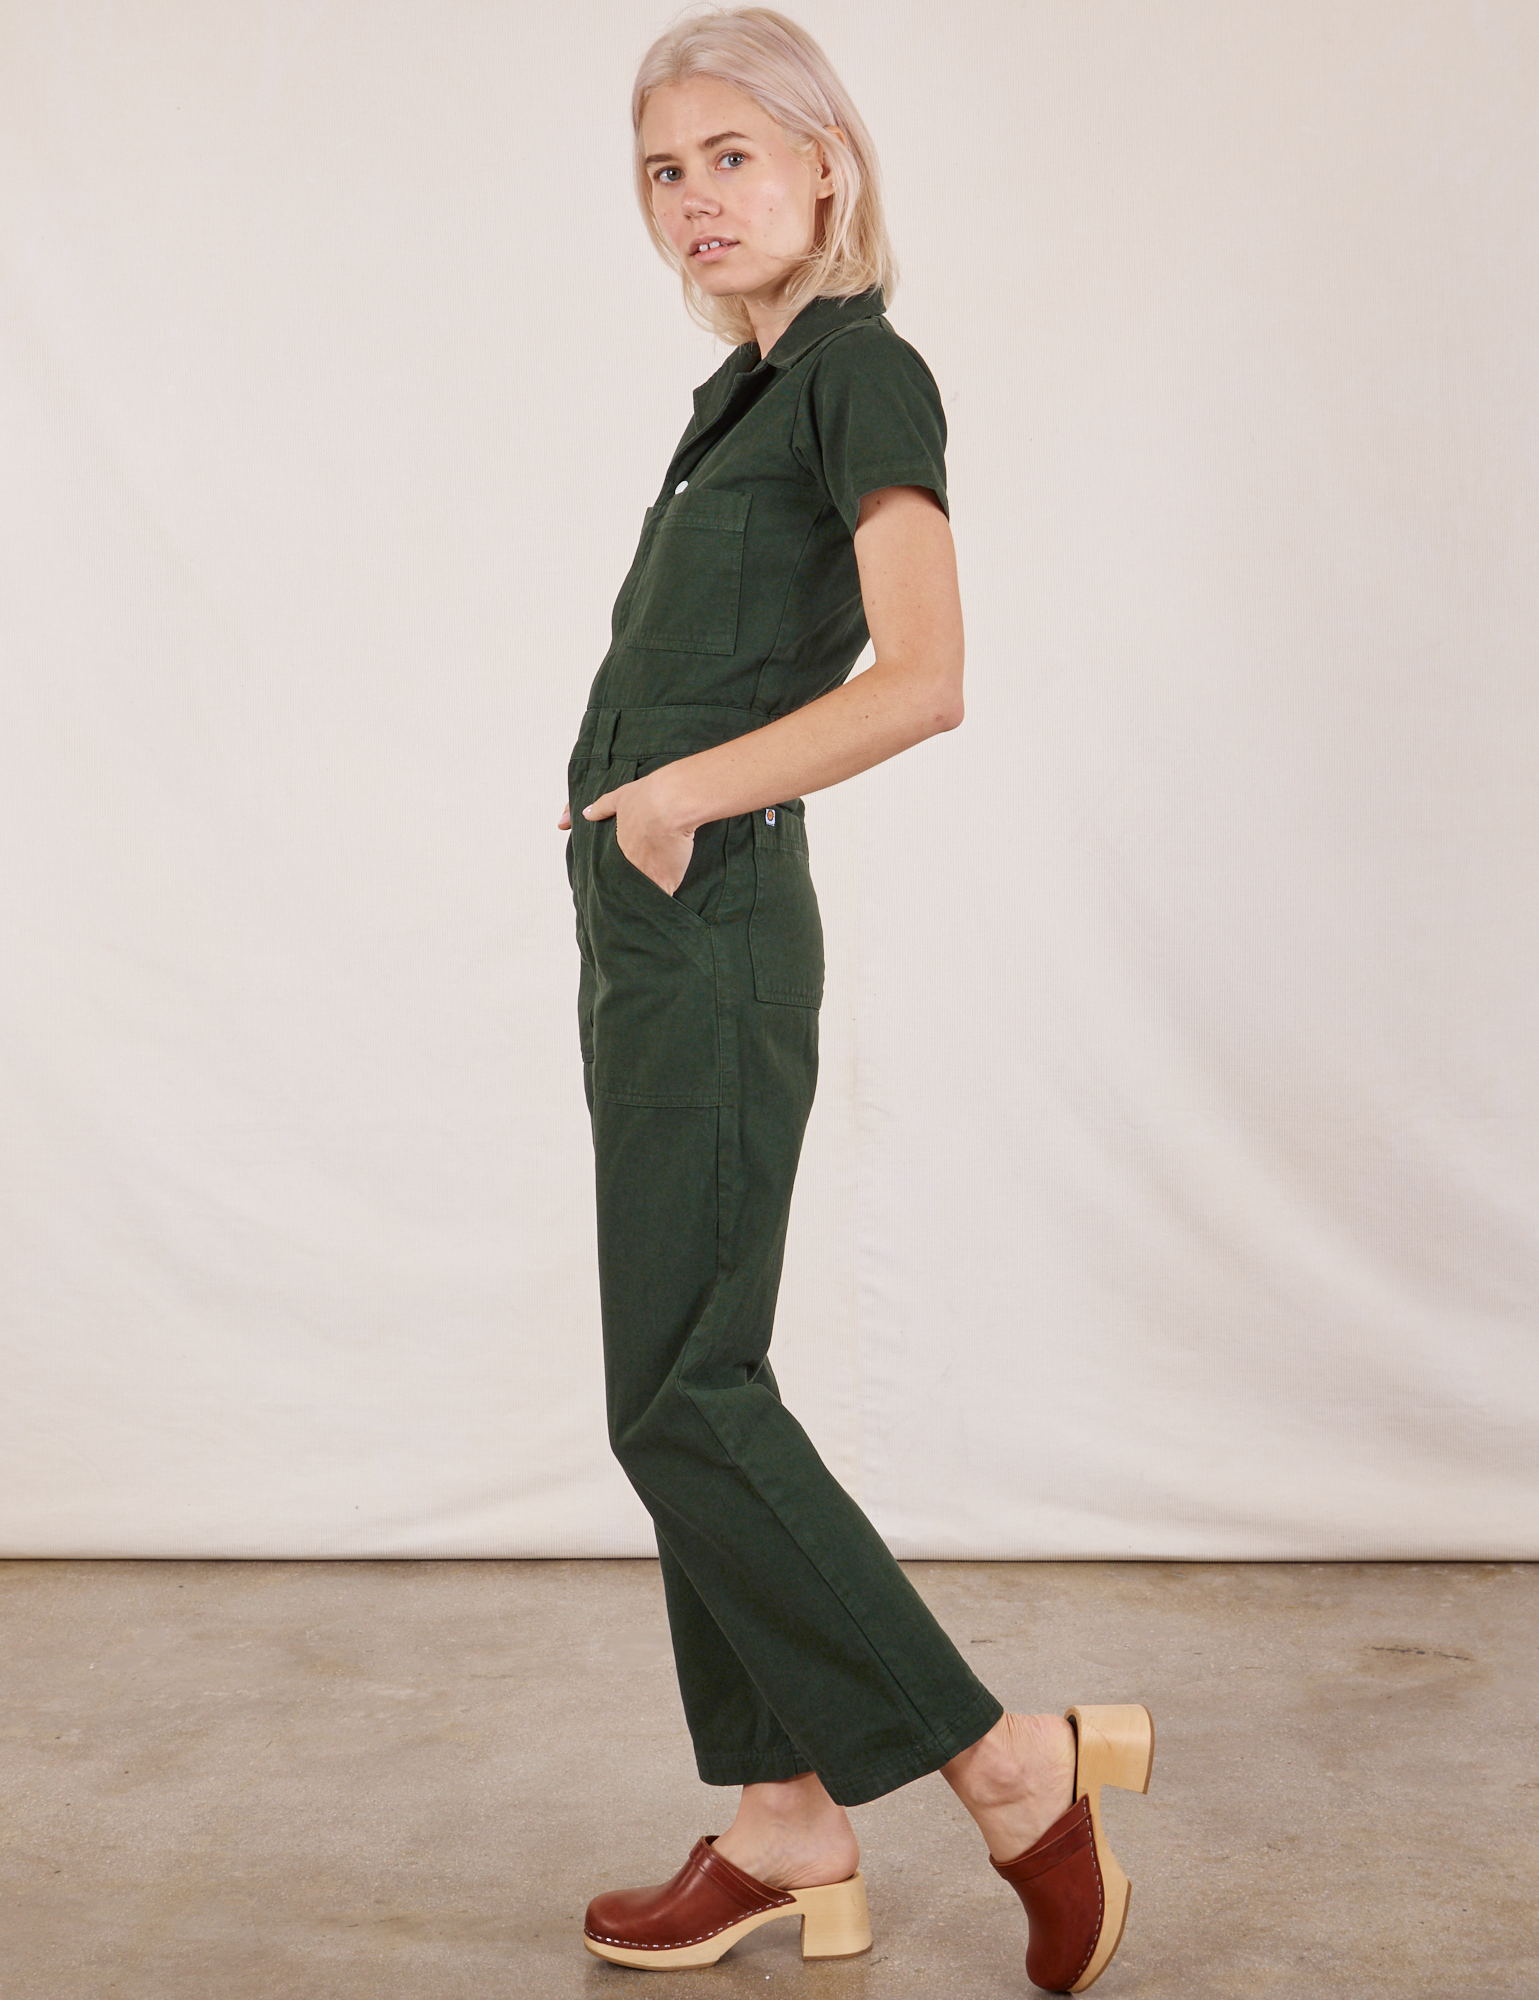 Short Sleeve Jumpsuit in Swamp Green side view on Madeline